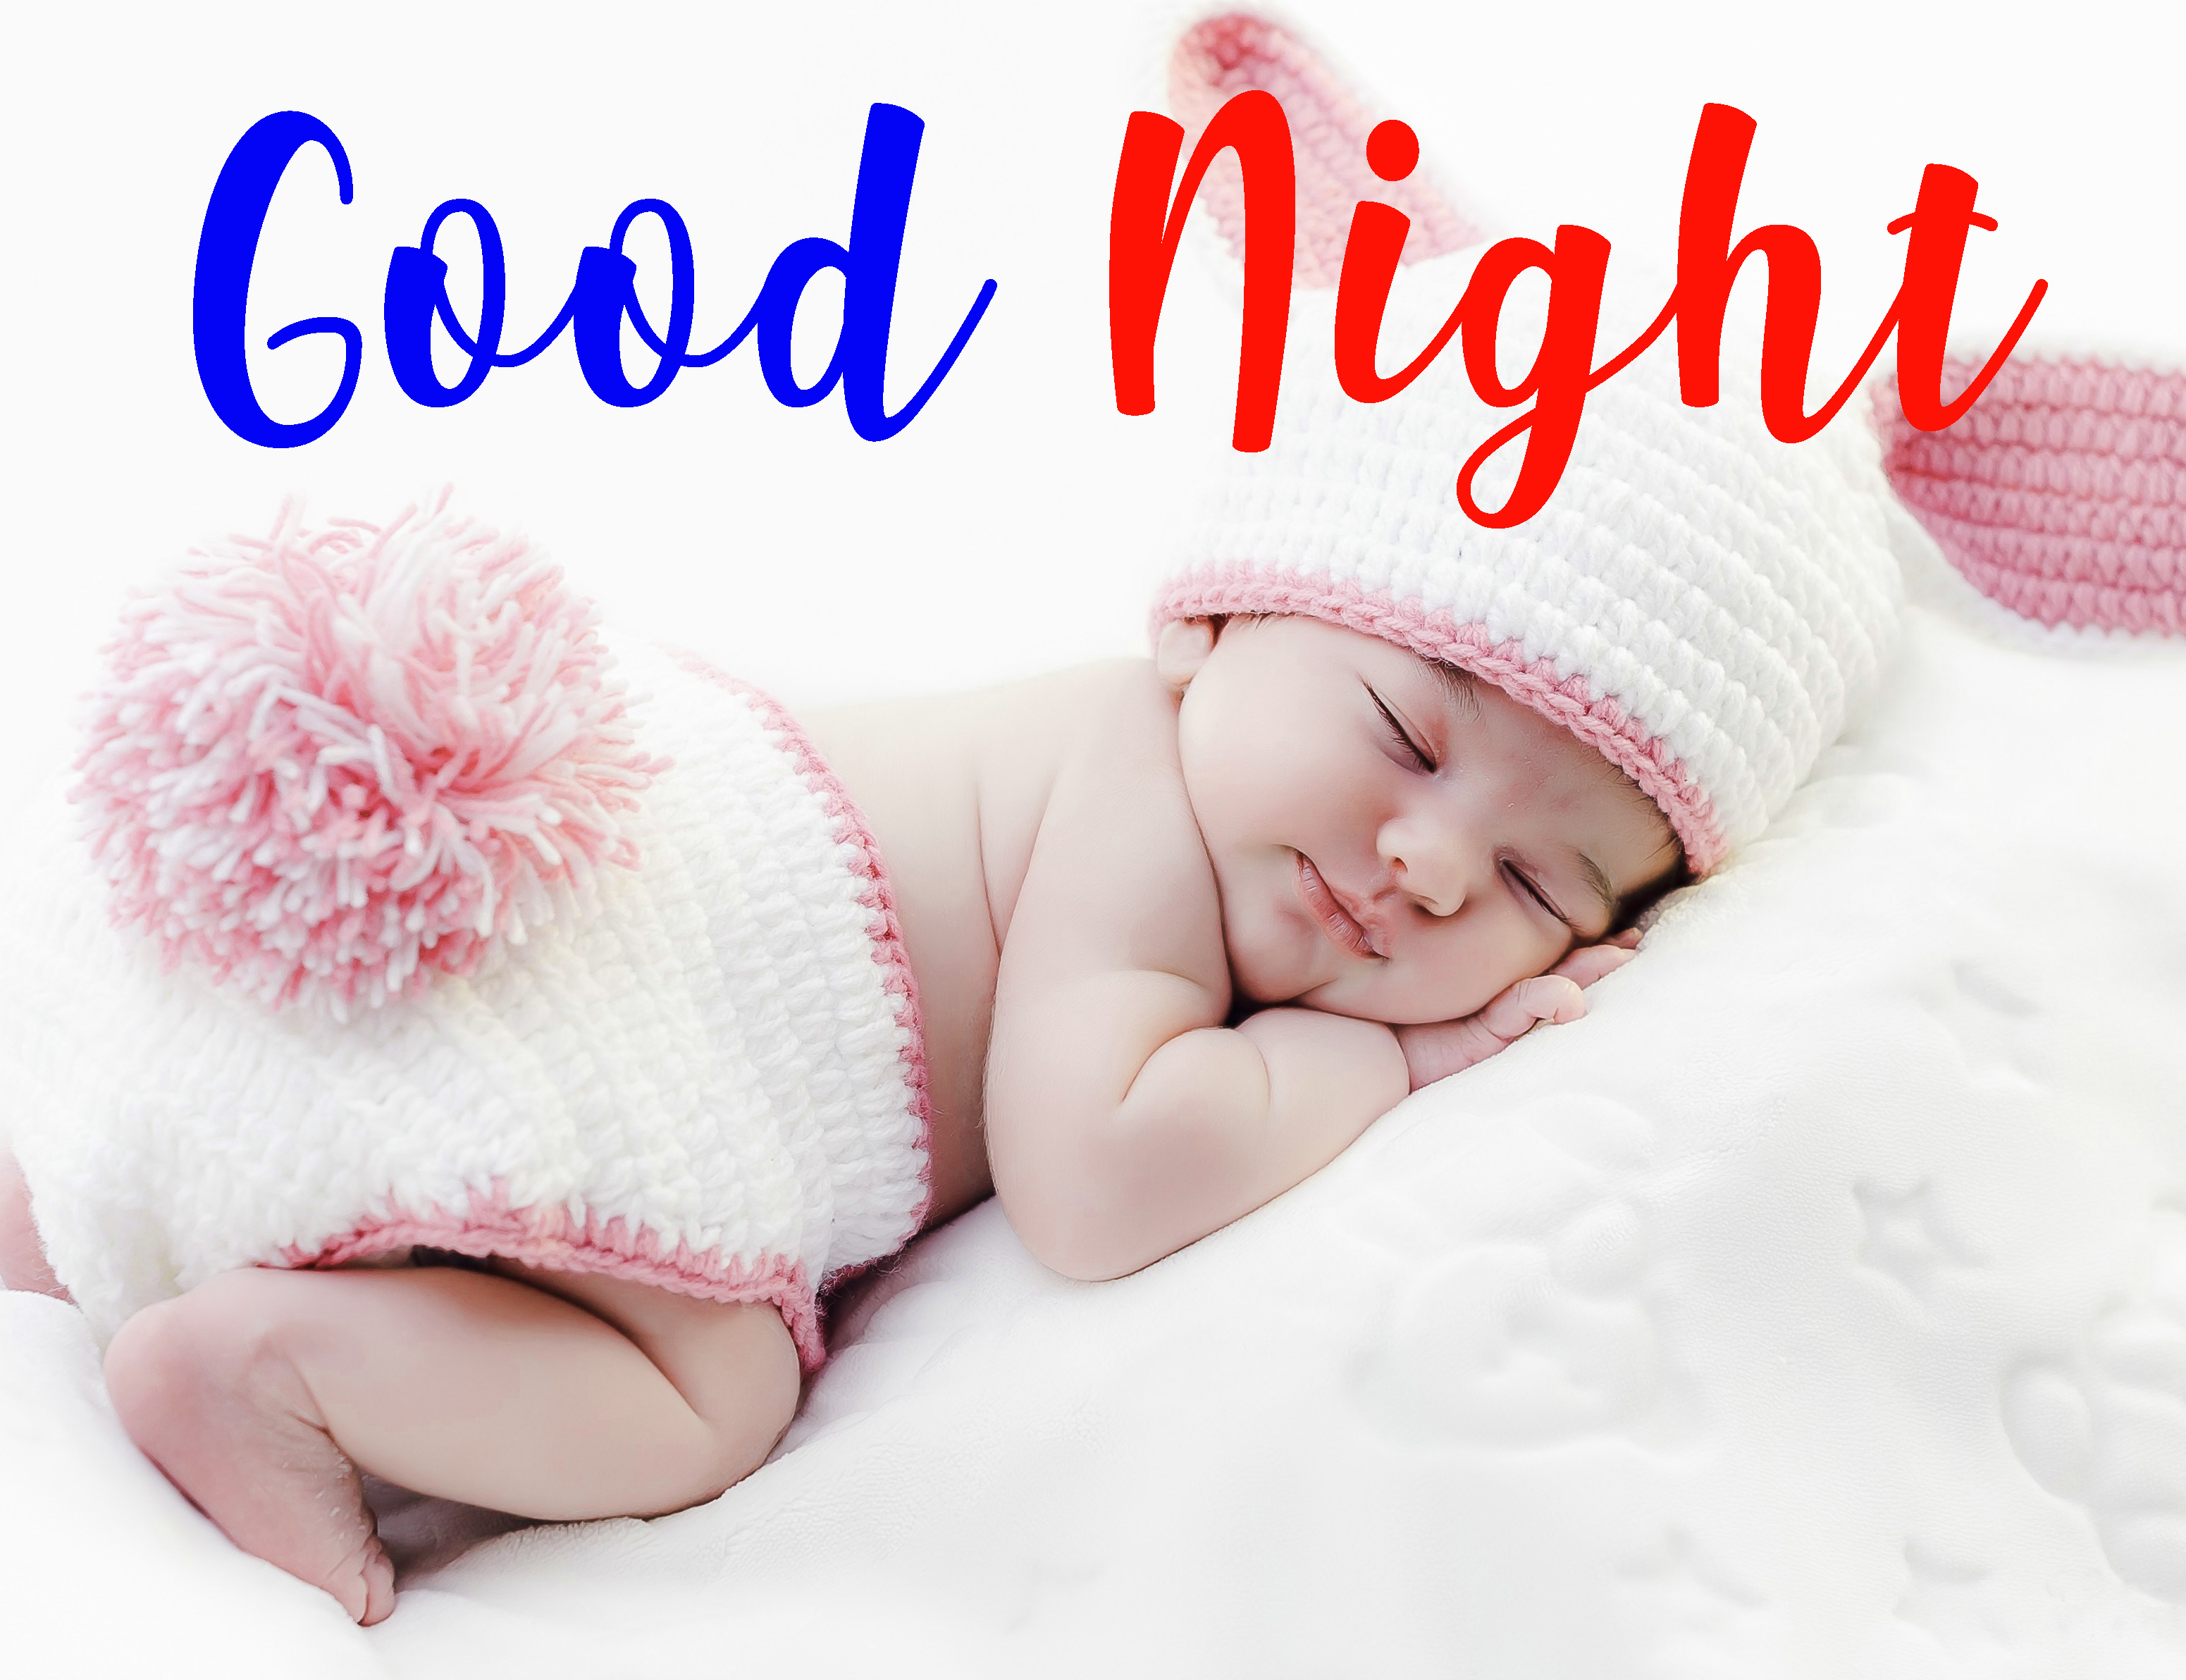 Good Night Images Wallpaper Pictures Free Download - Cute Baby Images Good Night , HD Wallpaper & Backgrounds